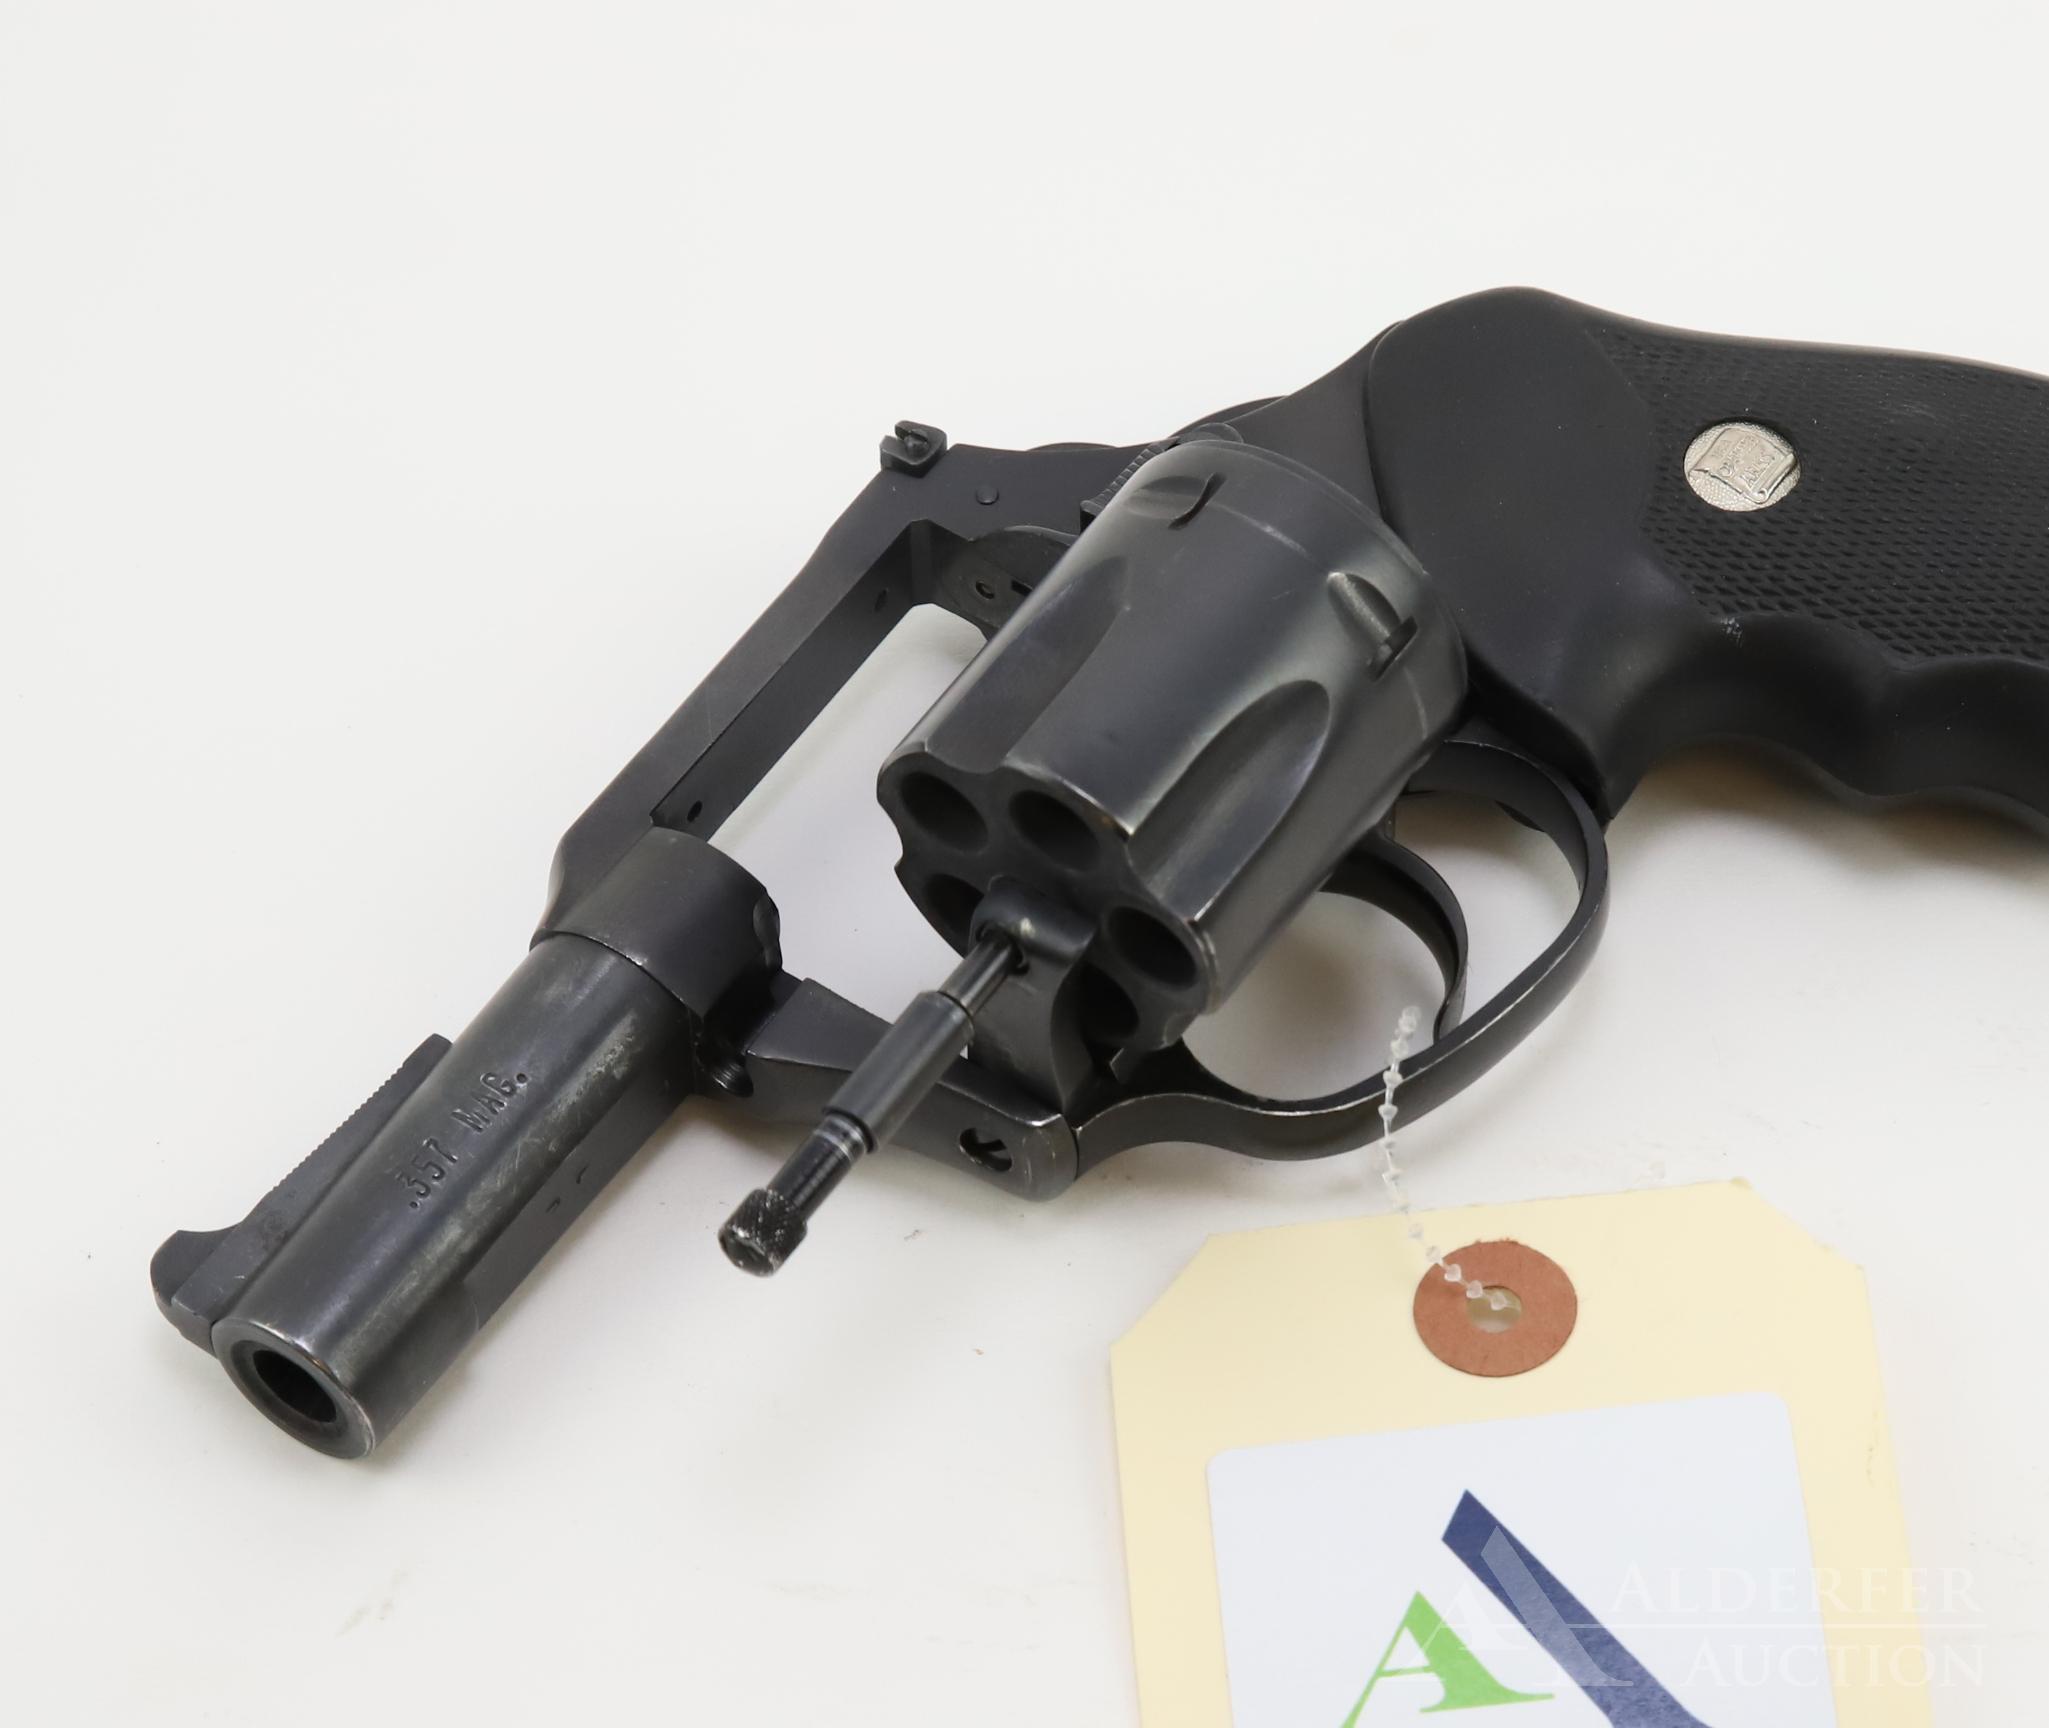 Charter Arms Hammerless double action revolver.